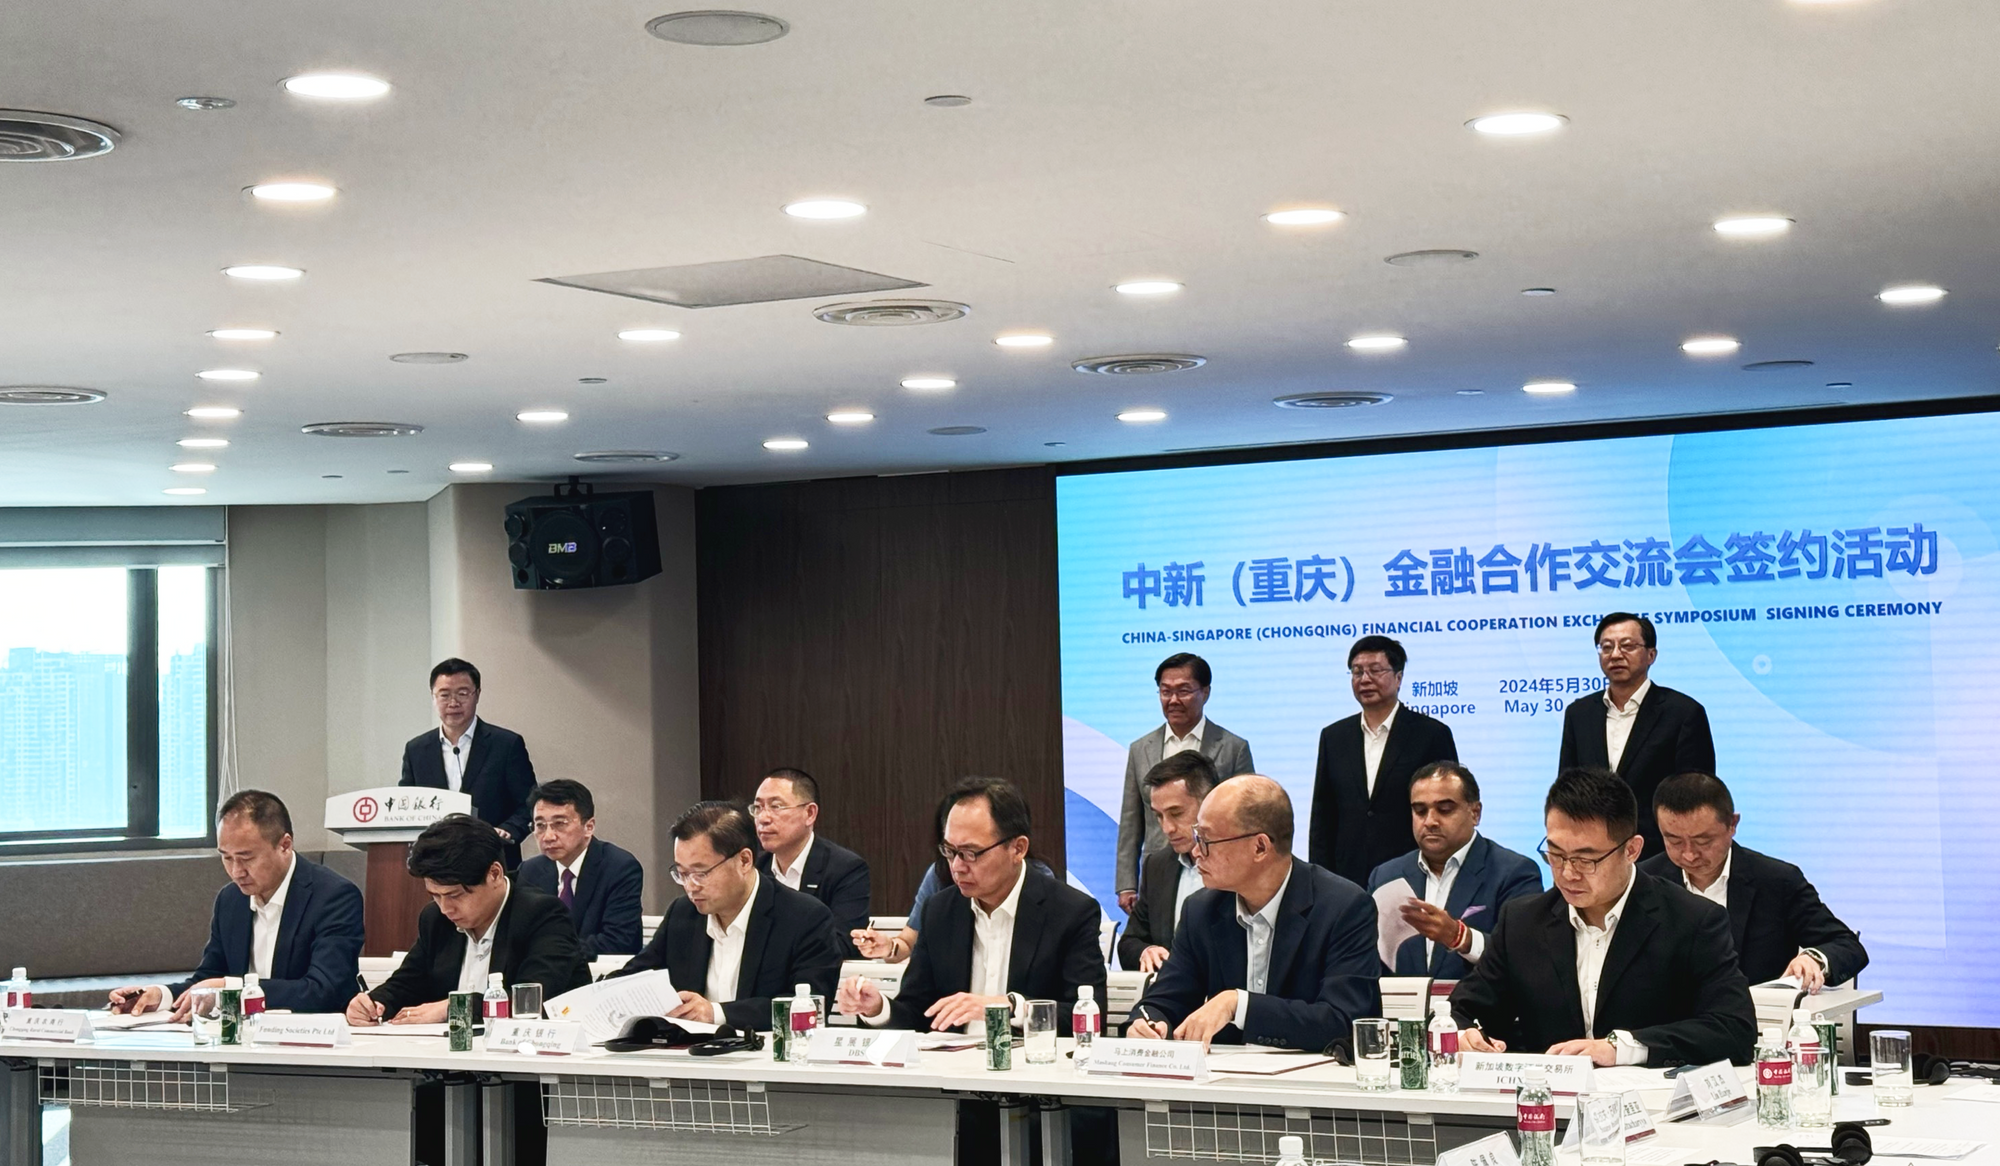 ADDX & Chongqing Share Transfer Center Signing Ceremony